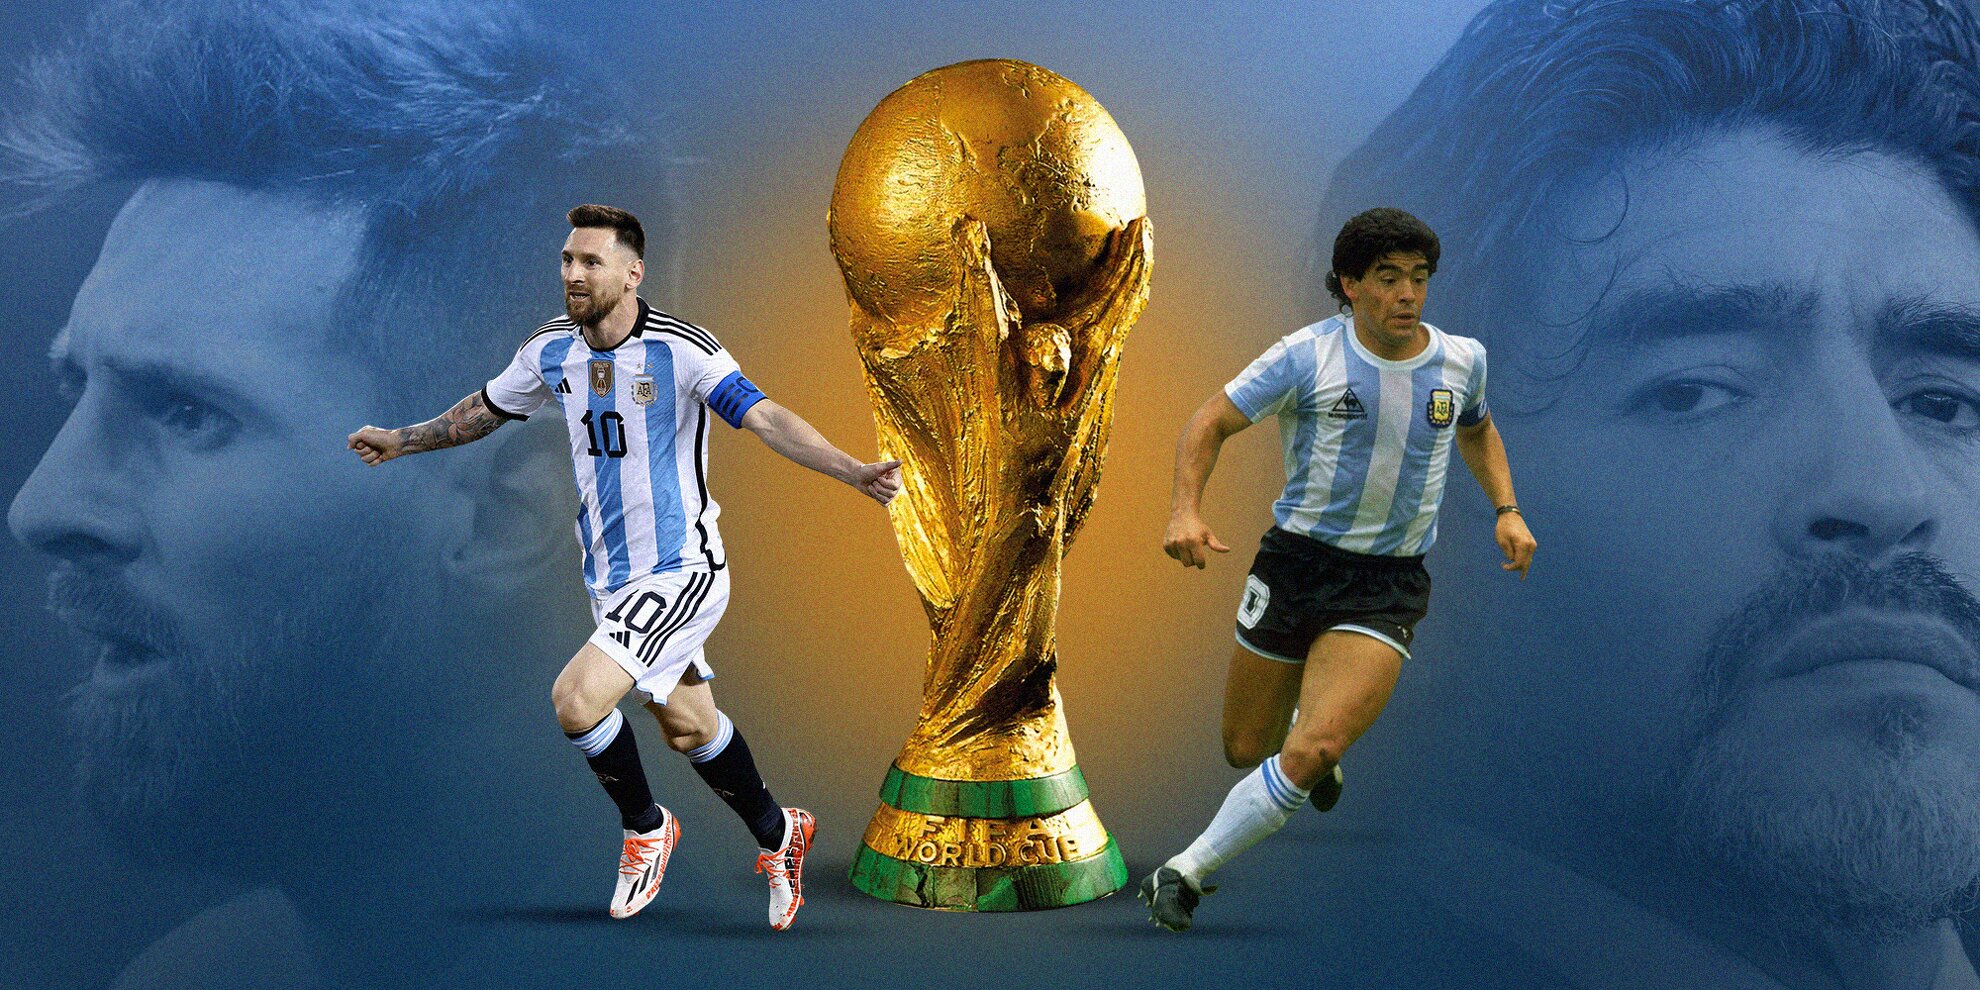 Lionel Messi vs Diego Maradona: Who has the better World Cup stats?